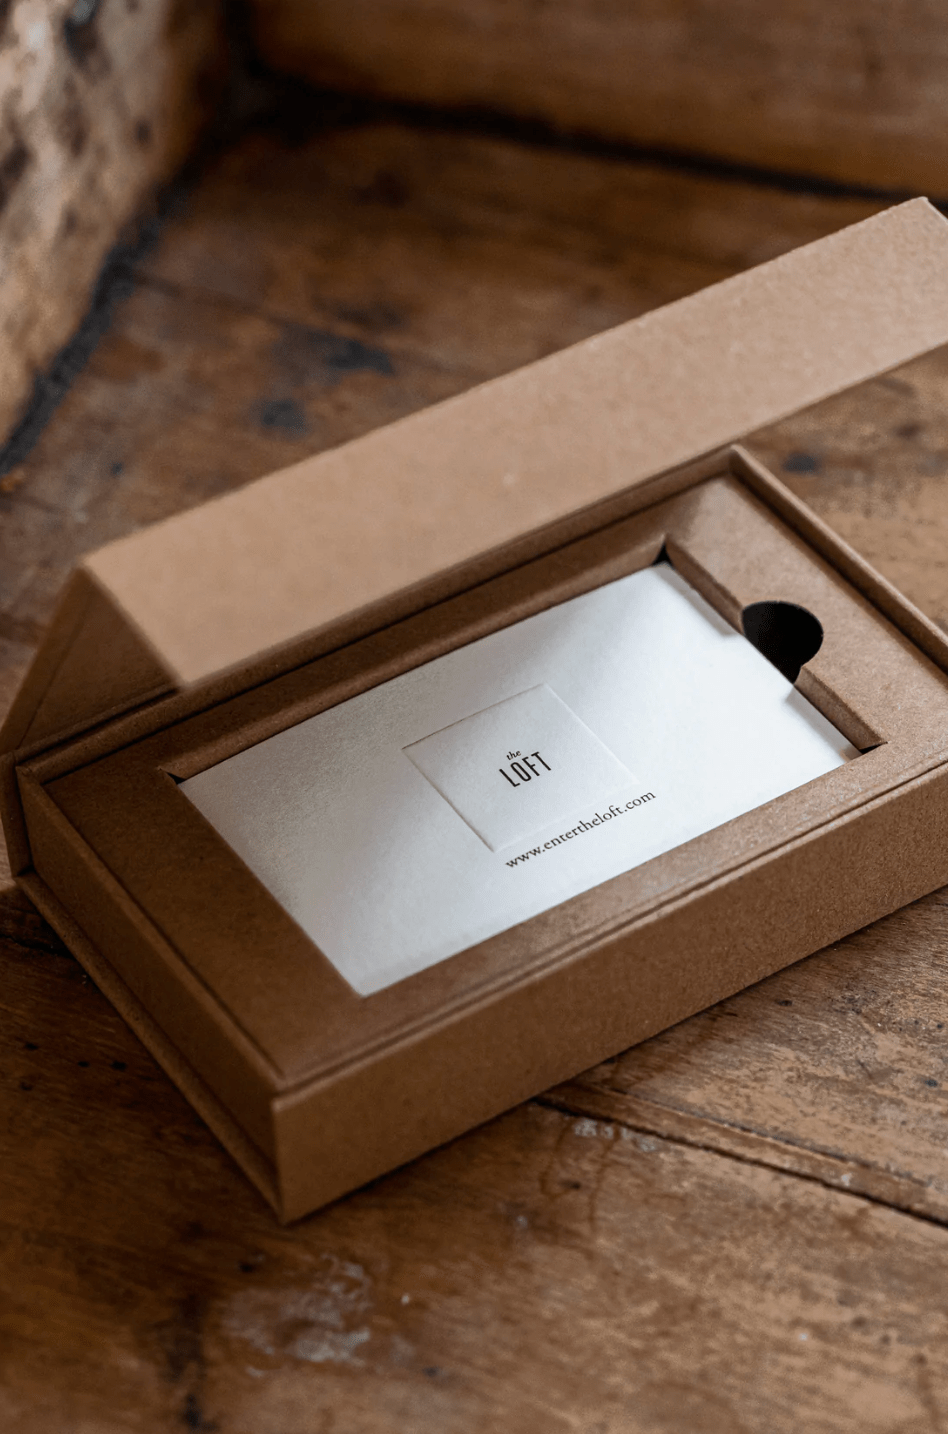 The Loft Gift Card design in brown cardboard box on wooden table